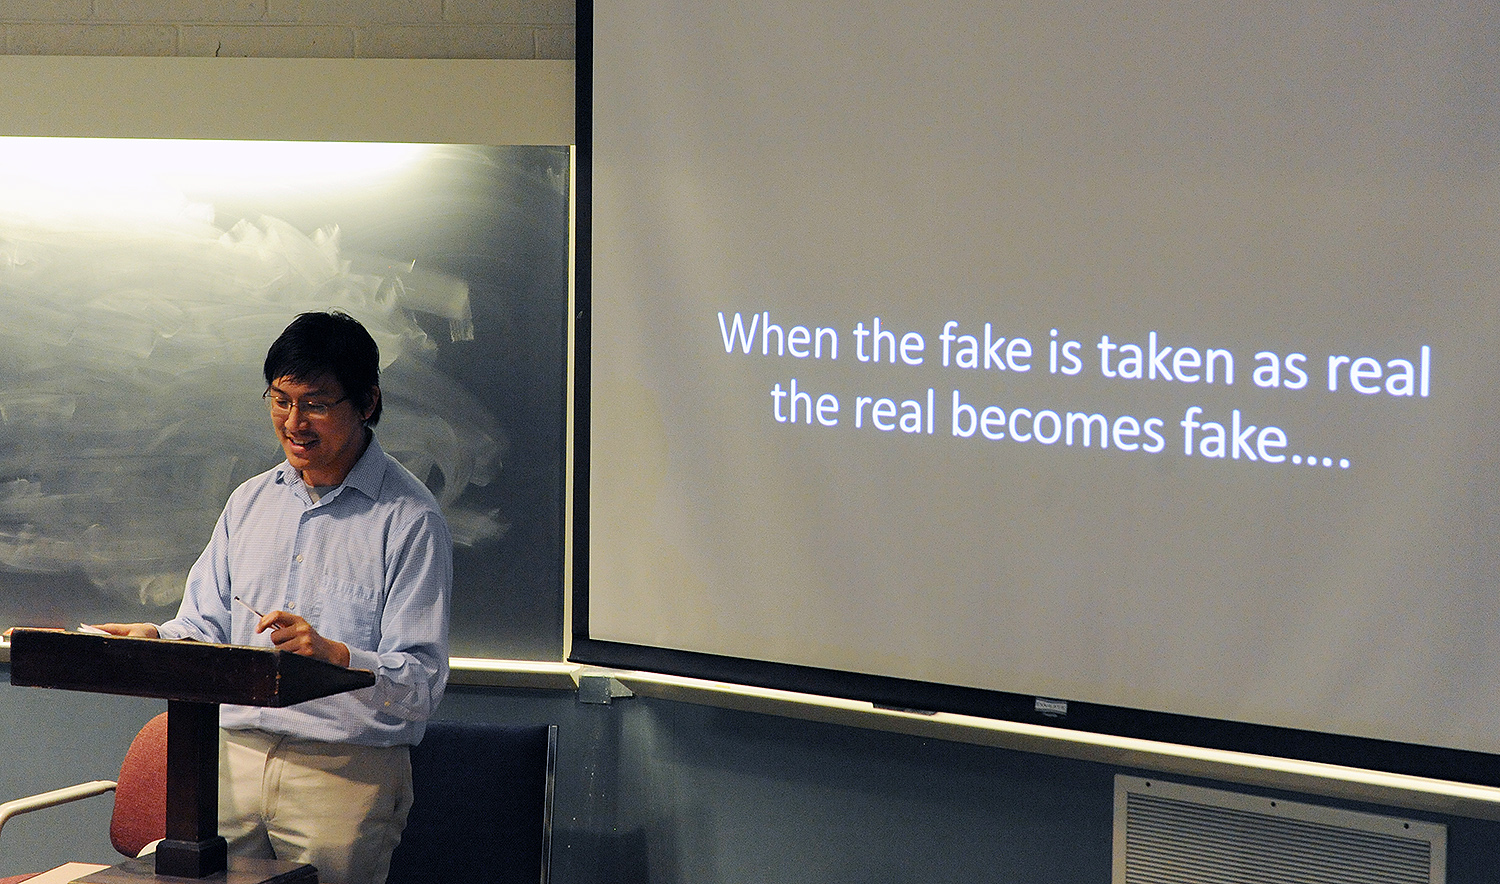 Tan spoke about how the state controlled the flow of information in imperial and modern China. The distinction between real and fake news rendered meaningless.